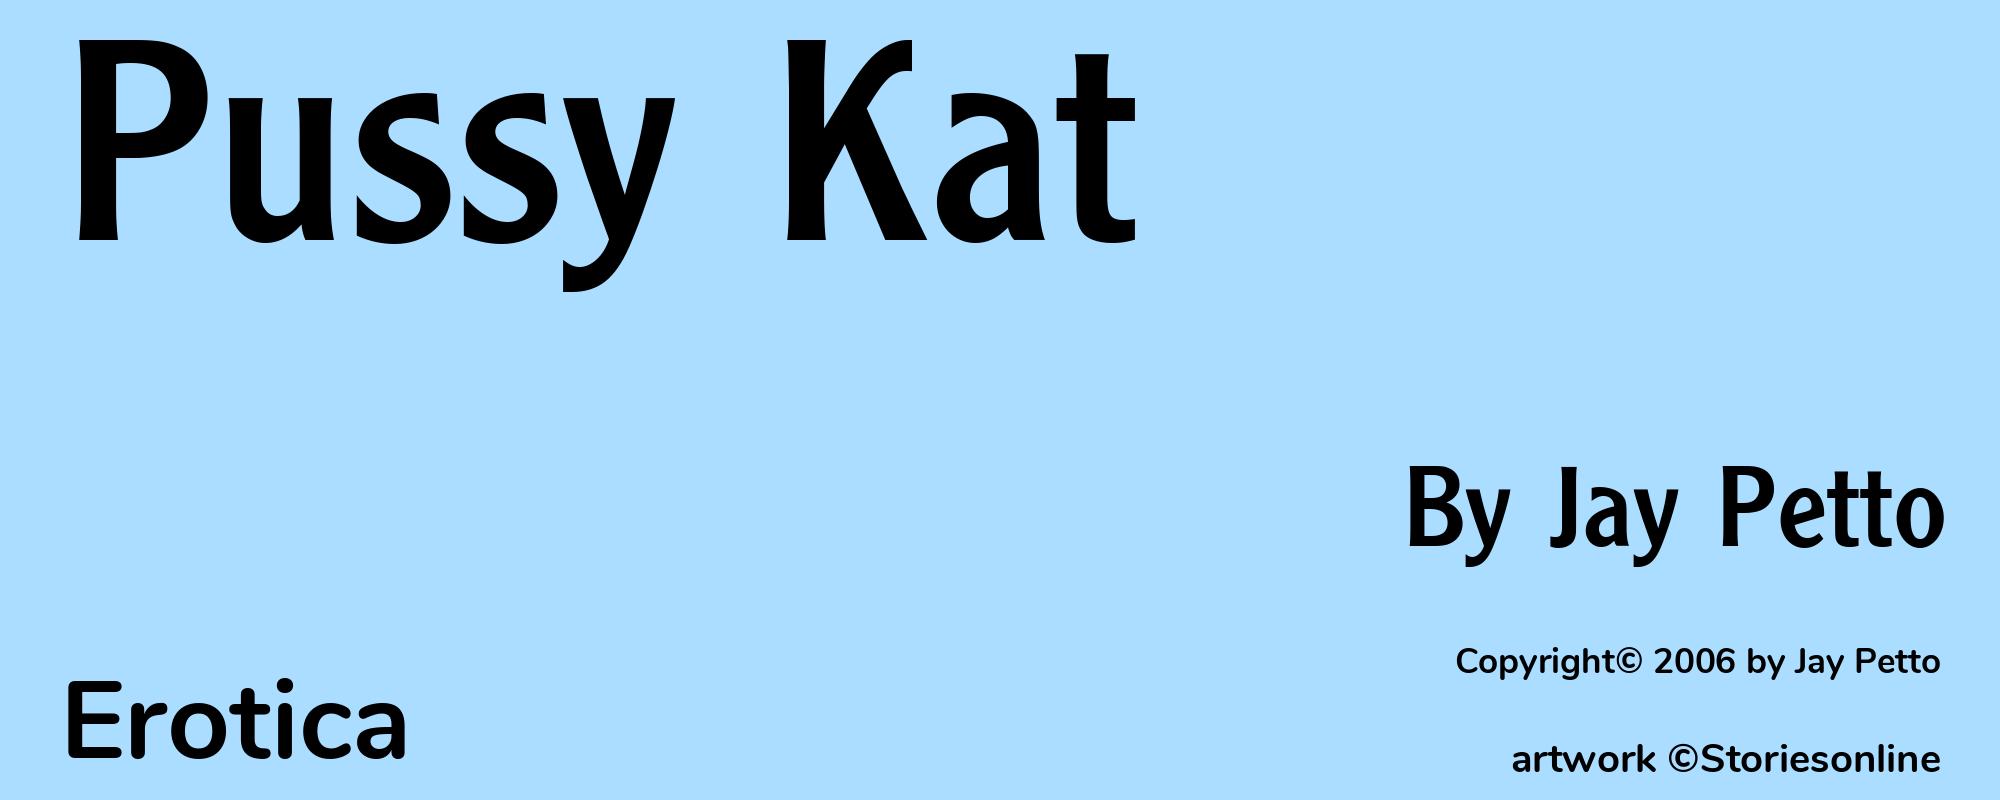 Pussy Kat - Cover